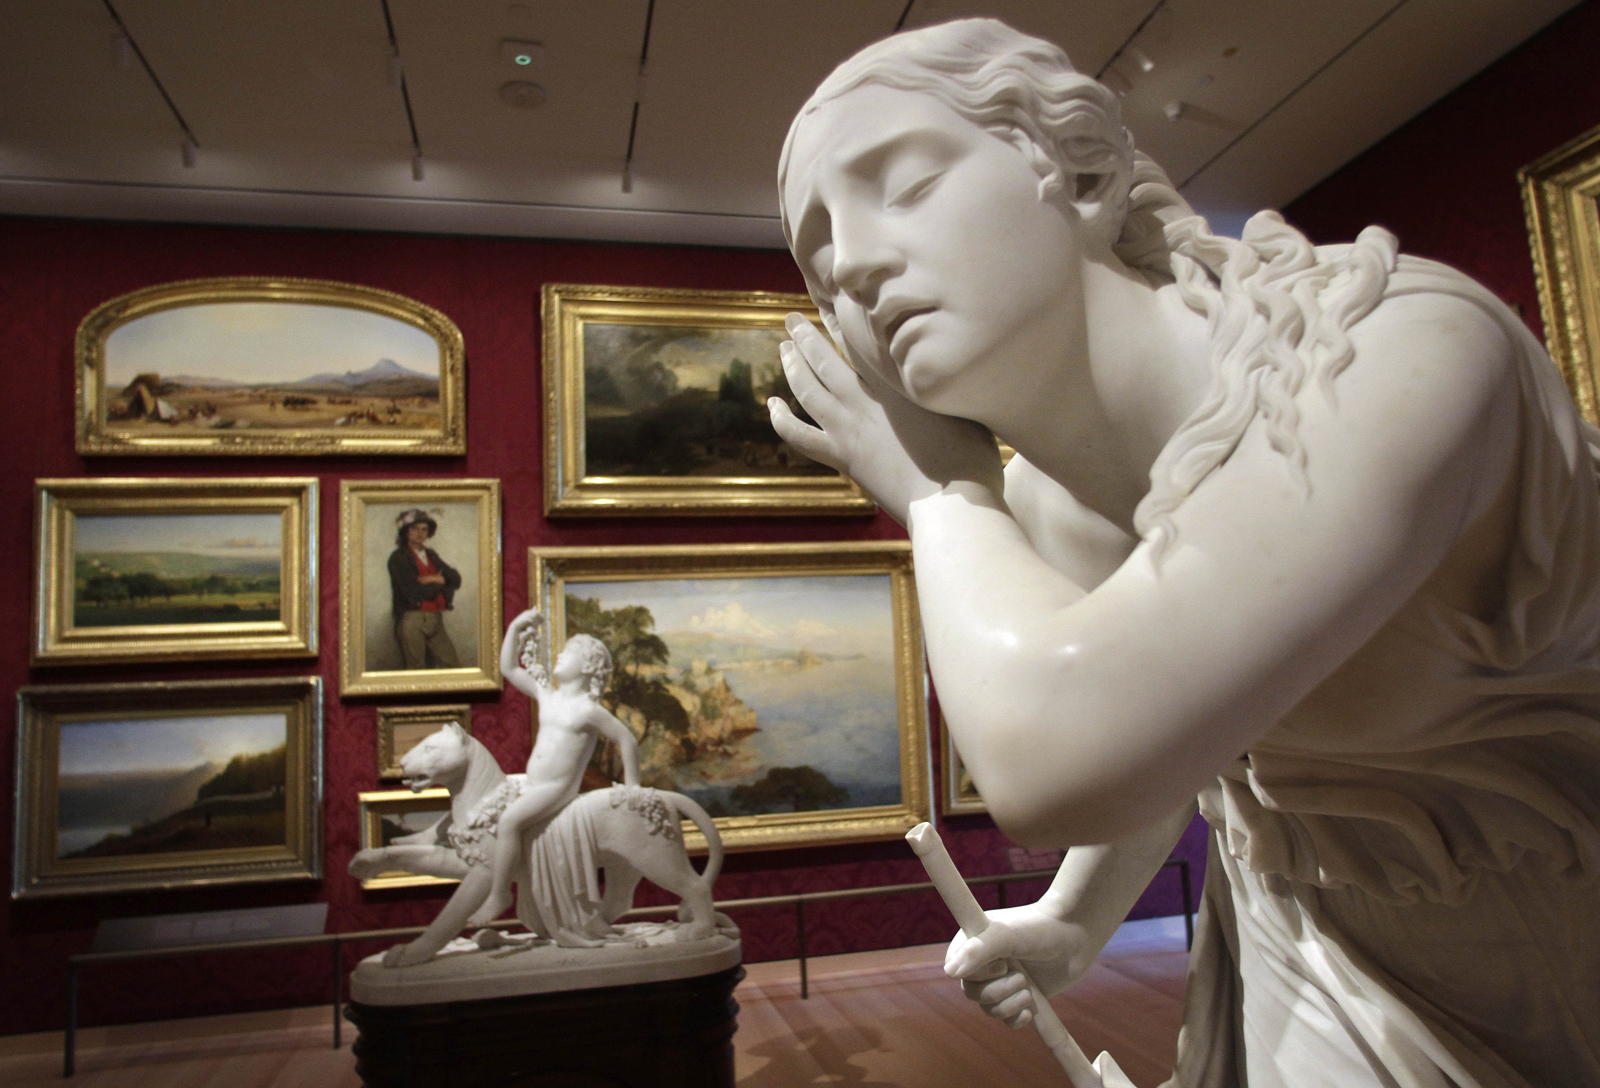 Explore The World’s Best Museums Without Leaving Your Living Room